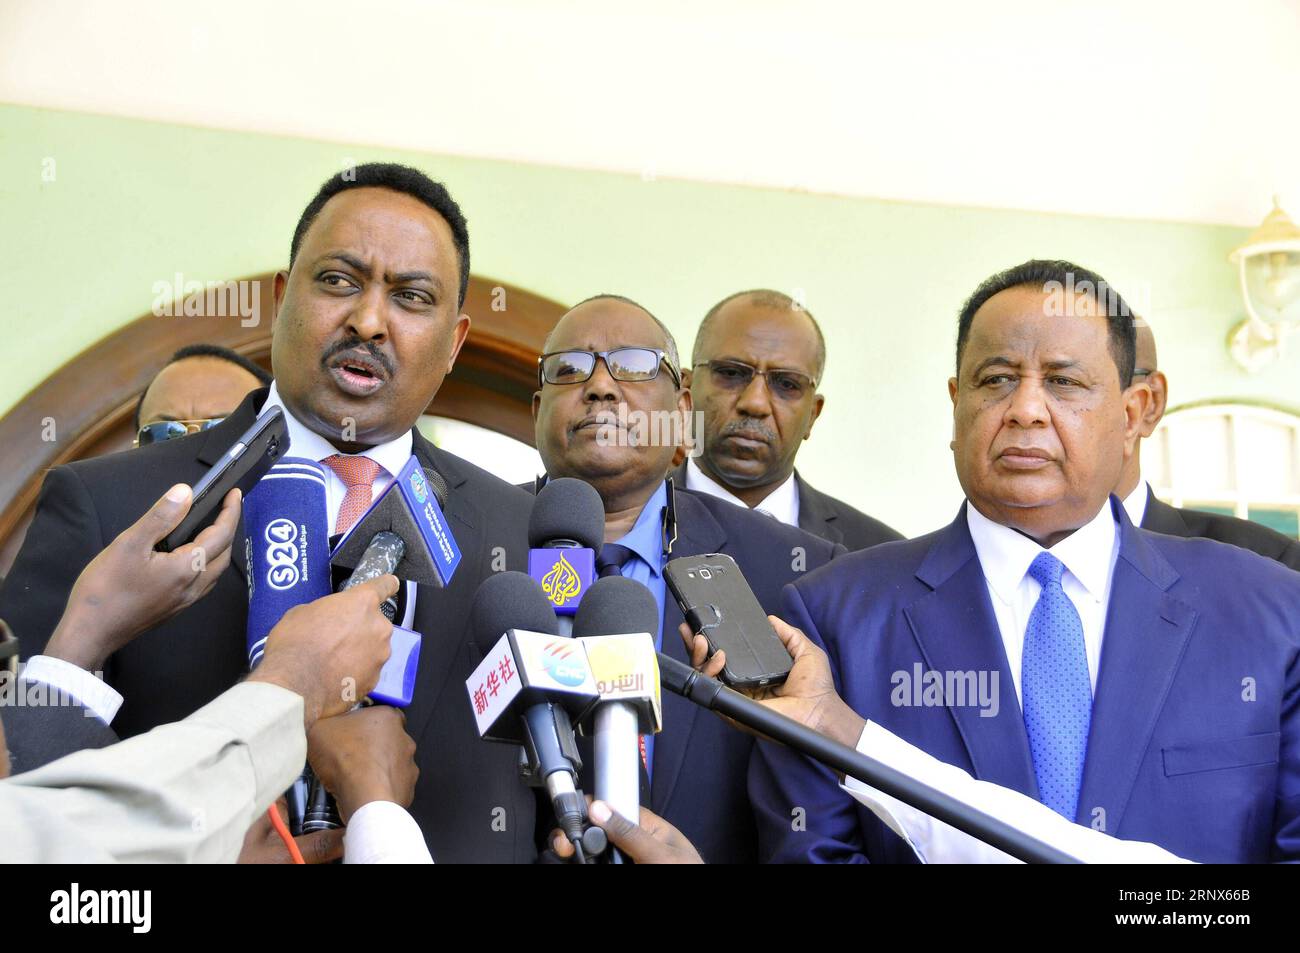 (180114) -- KHARTOUM, Jan. 14, 2018 -- Ethiopian Foreign Minister Workneh Gebeyehu (L, front) speaks during a joint press conference with his Sudanese counterpart Ibrahim Ghandour (R, front) in Khartoum, Sudan, on Jan. 14, 2018. Ethiopian Foreign Minister Workneh Gebeyehu was on an official visit to Ethiopia s neighboring country Sudan. ) SUDAN-KHARTOUM-ETHIOPIAN FM-VISIT MohamedxBabiker PUBLICATIONxNOTxINxCHN Stock Photo